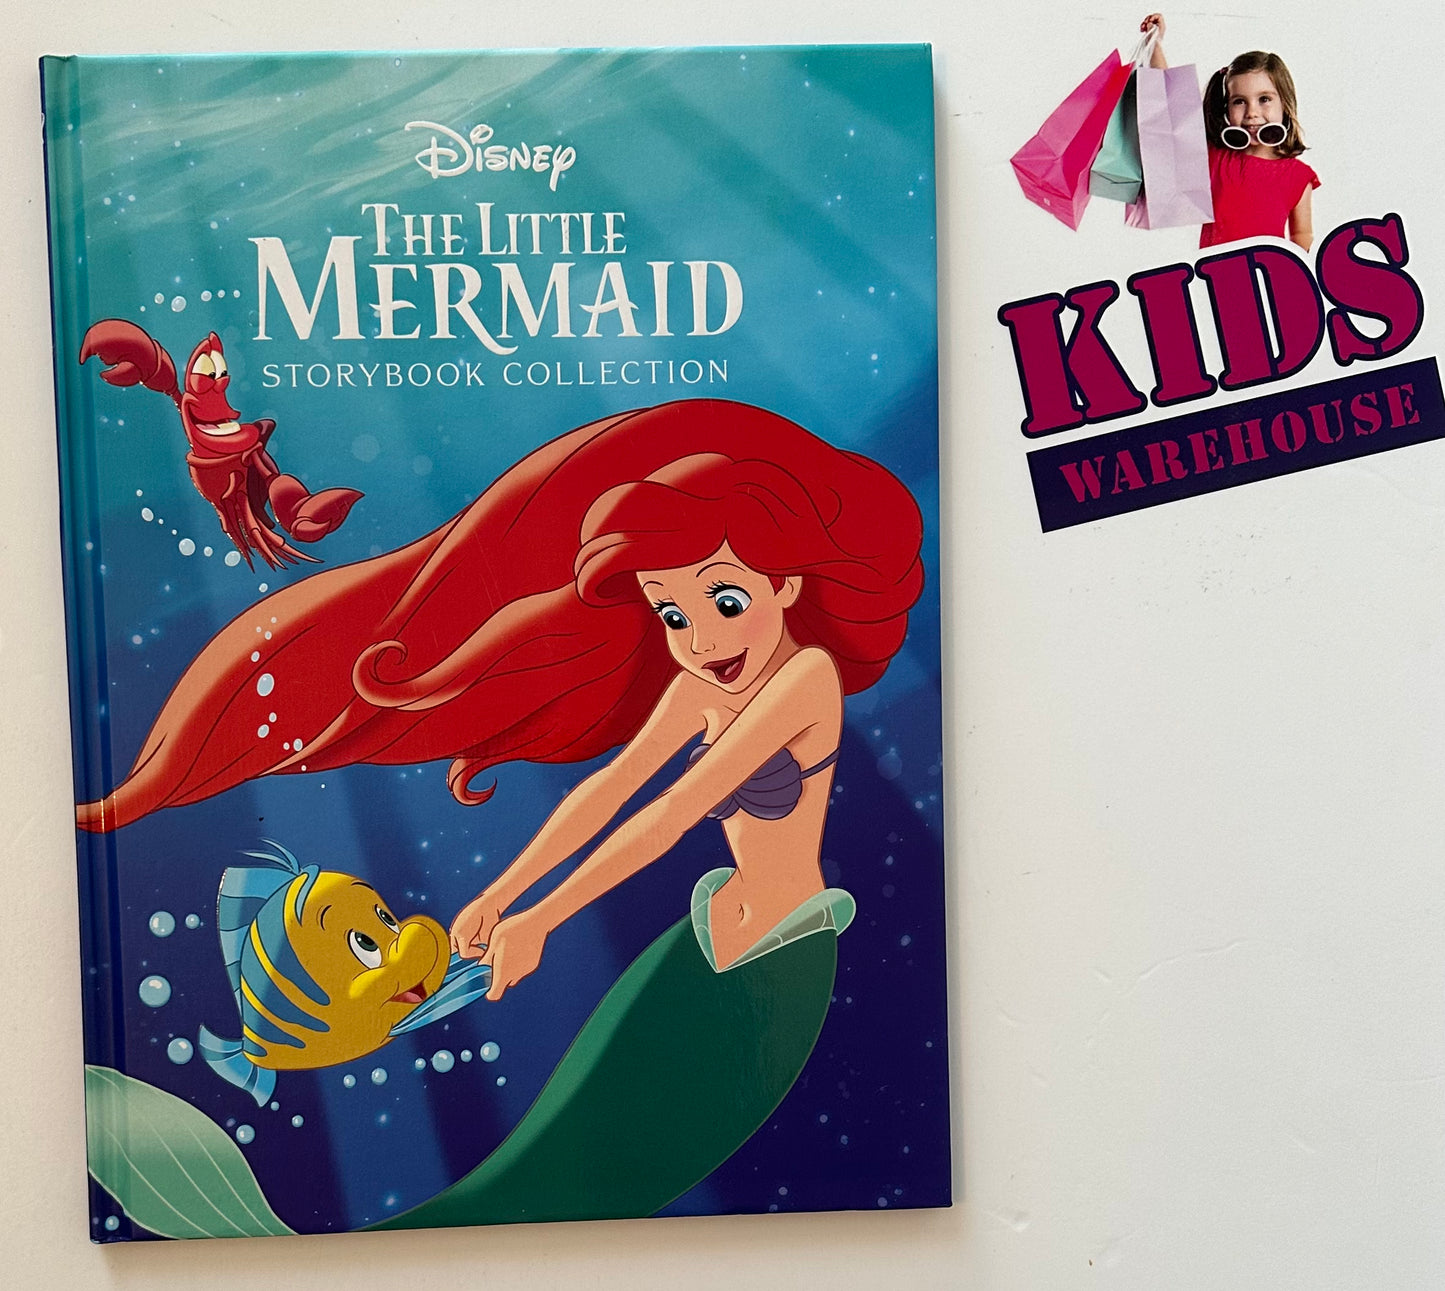 Disney The Little Mermaid Storybook Collection